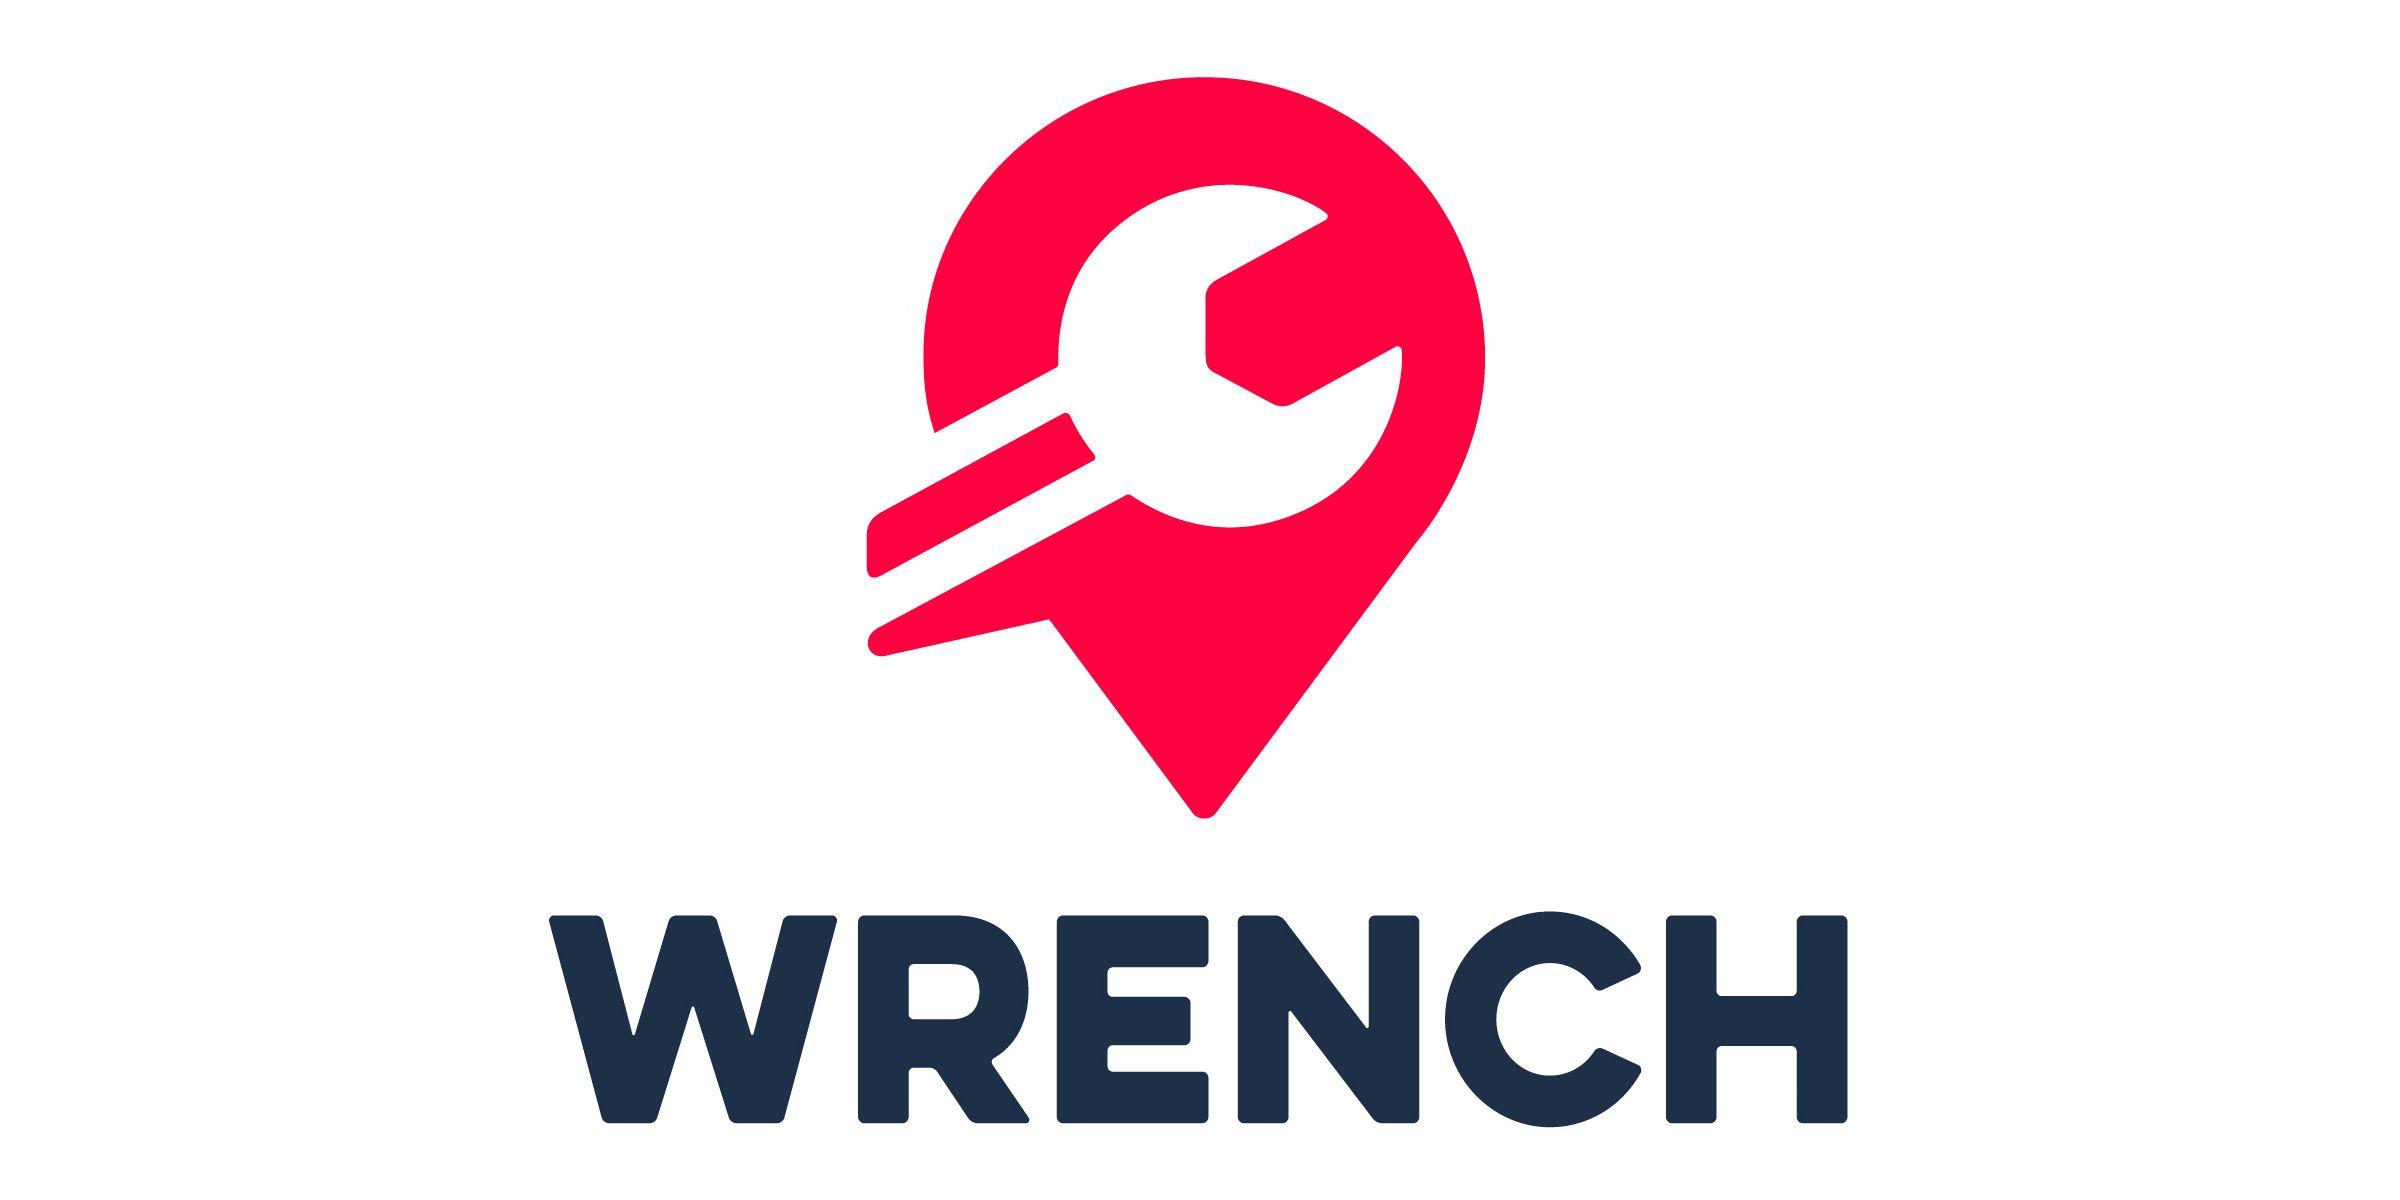 Wrench Logo - Mobile Auto Repair & Maintenance Mechanics Near You | About | Wrench